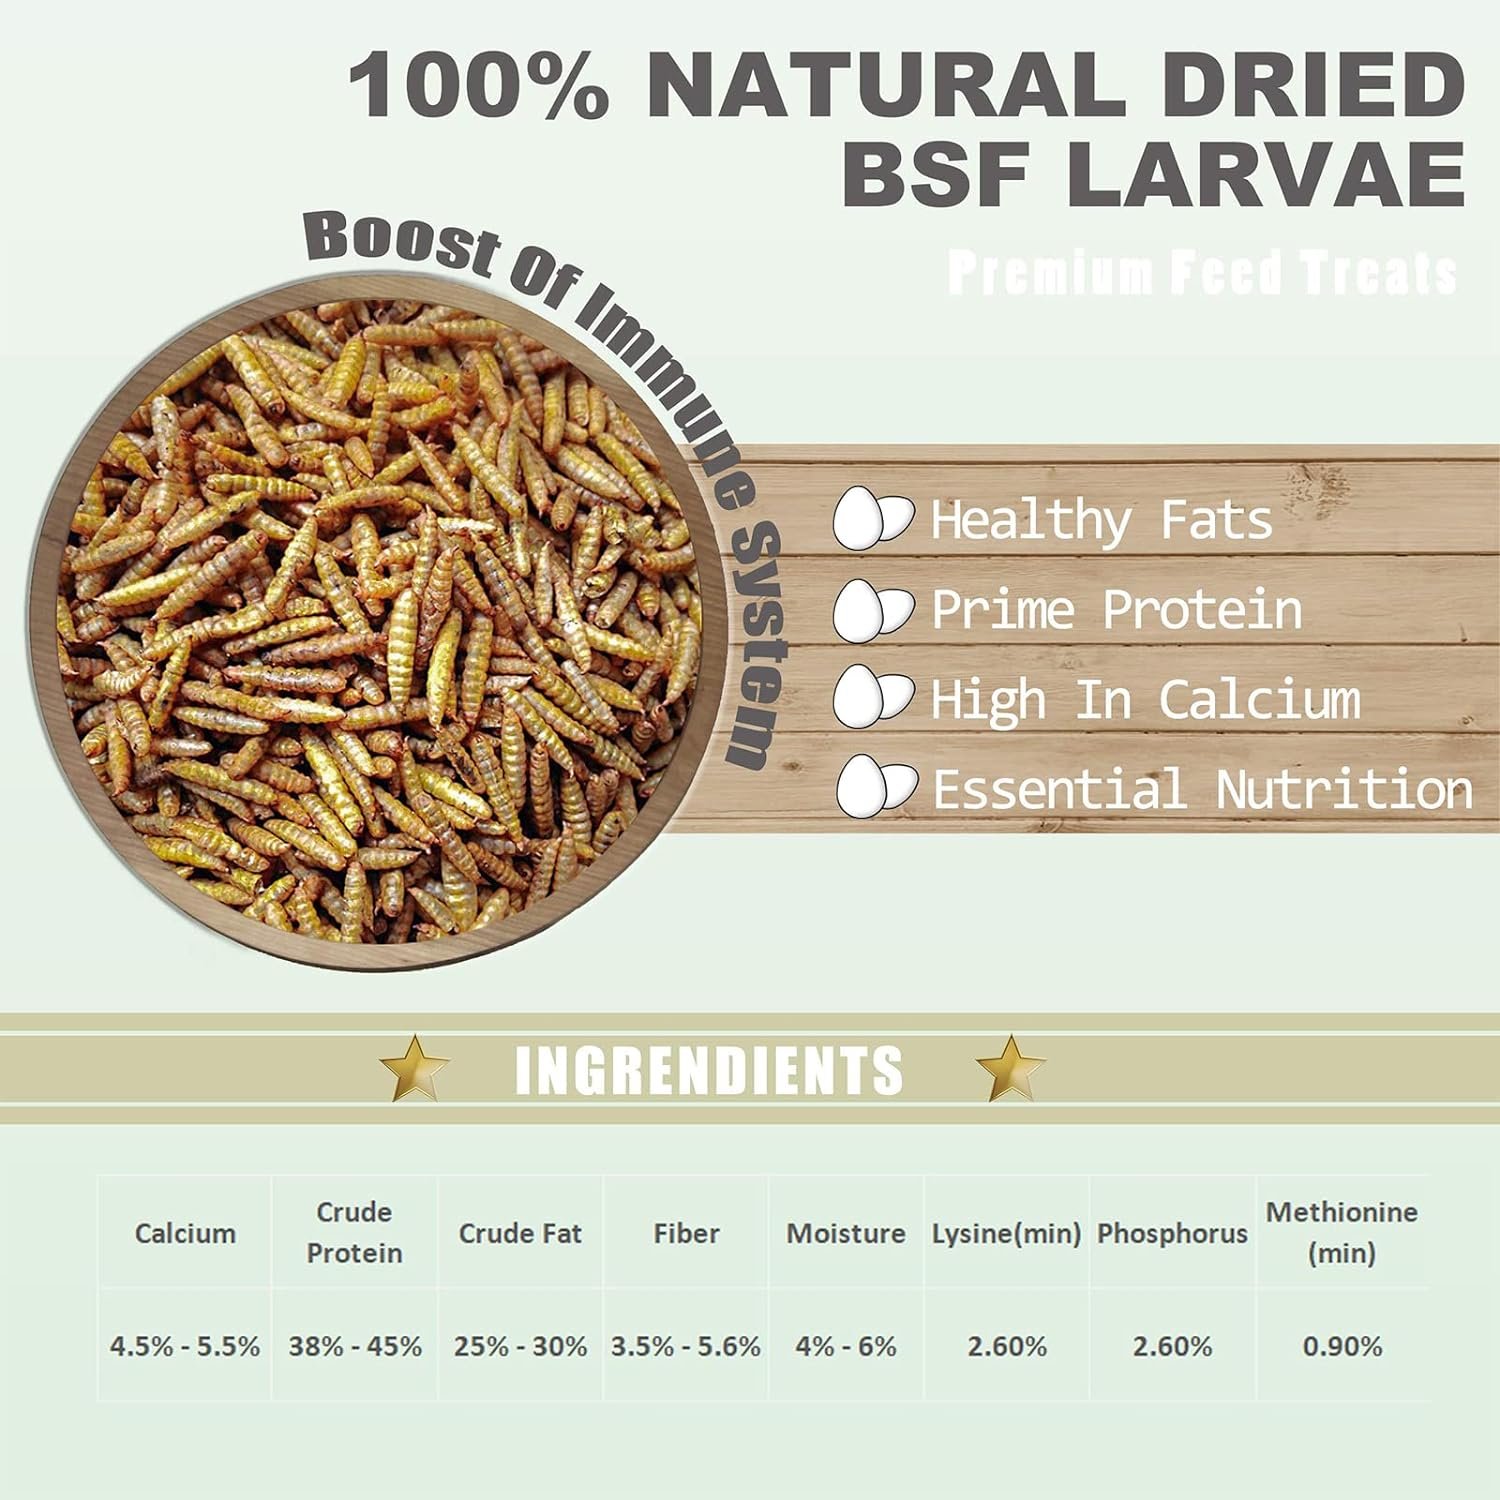 Amzey 10LBS Dried Black Soldier Fly Larva/Dried Mealworms - 100% Natural BSF Larvae - 85X More Calcium Than Mealworms - High Calcium Treats for Chickens, Birds, Hens, Ducks